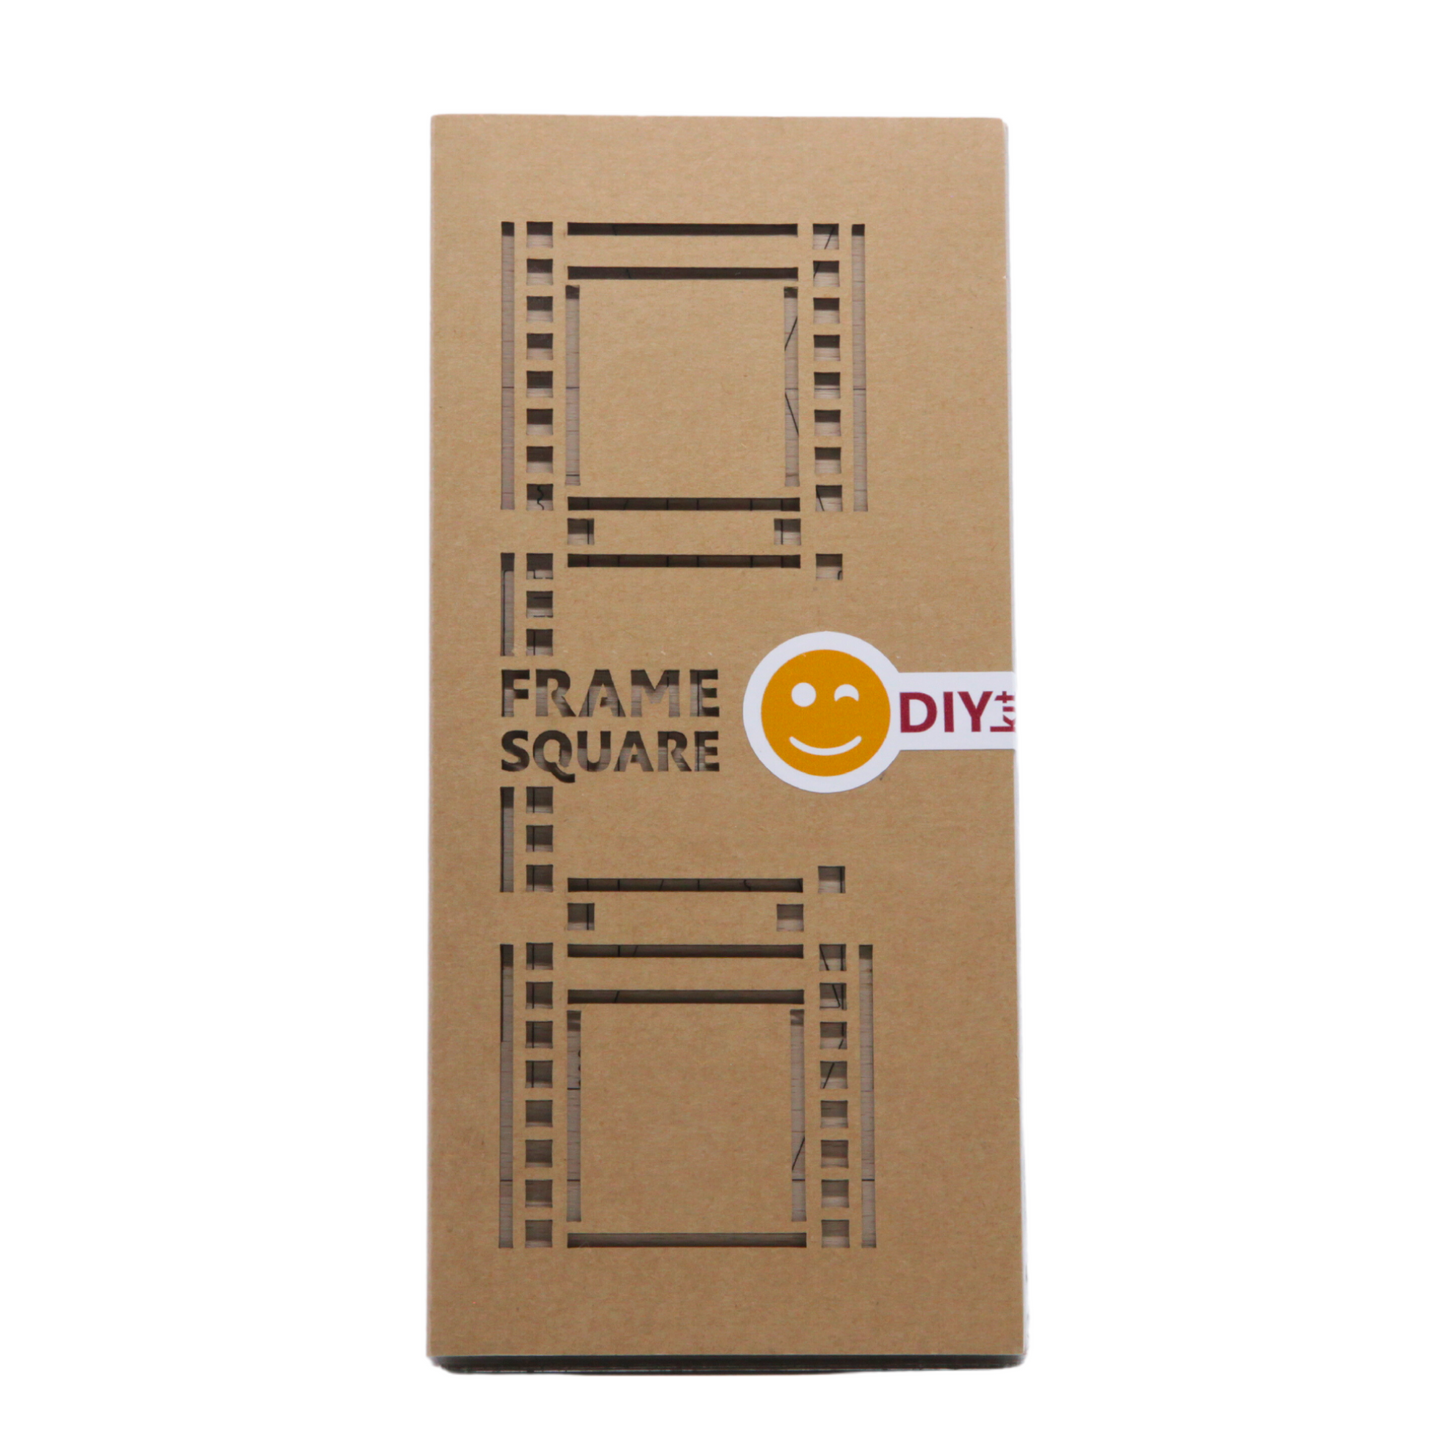 A packed set of three Natural wood plywood interconnectable Instax SQUARE film photo frames for instant SQUARE photos. 